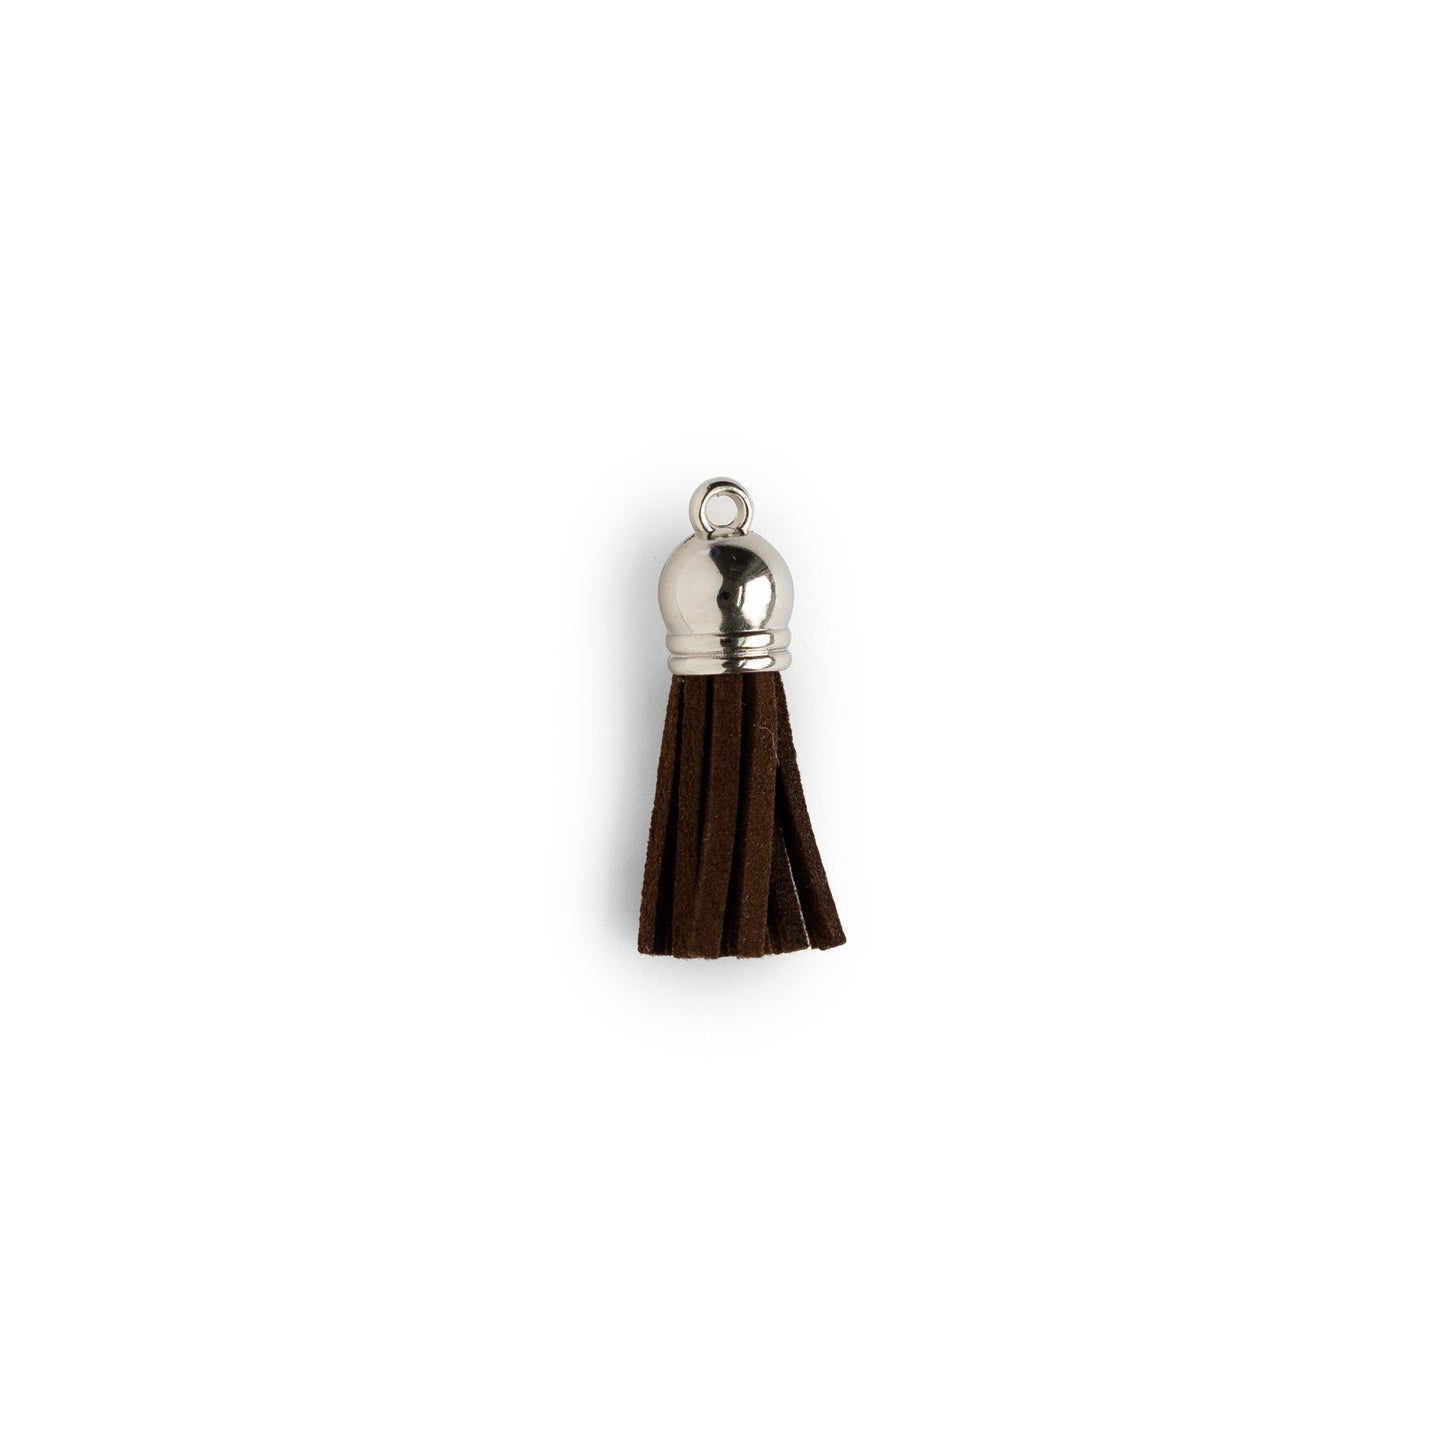 LAST CHANCE Mini Tassels Chocolate Brown from Cara & Co Craft Supply